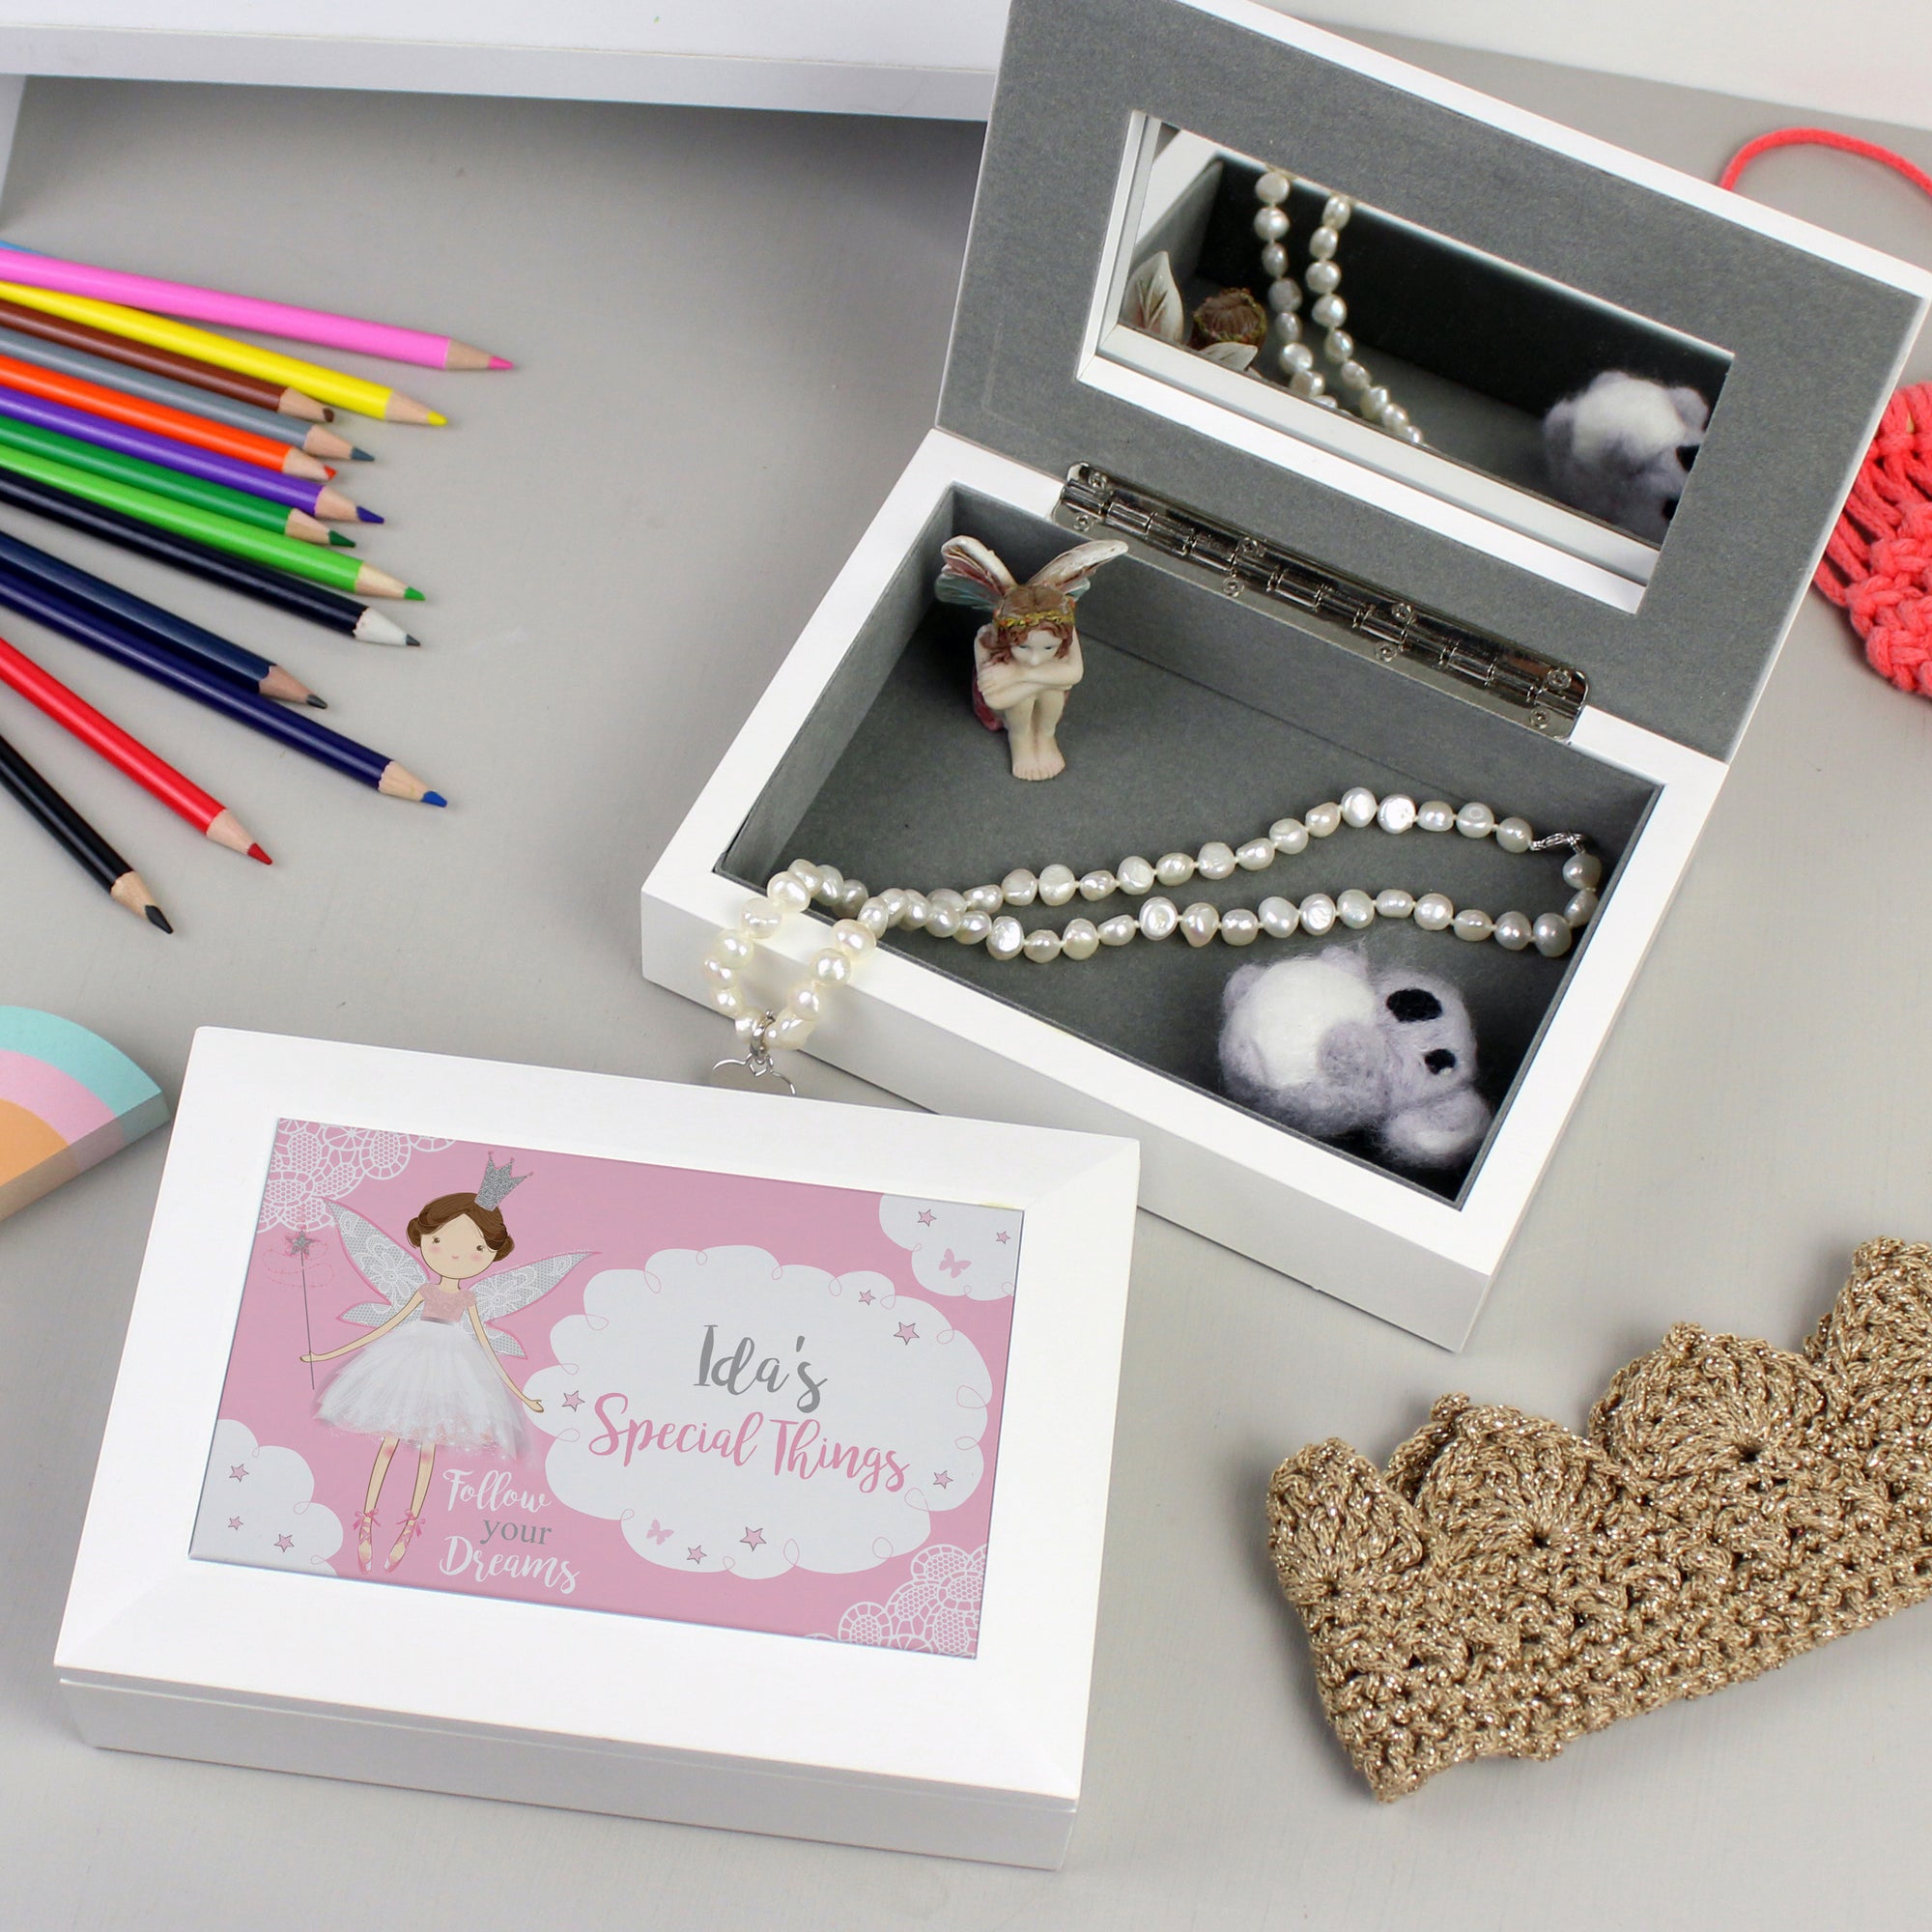 Image of a child's white jewellery box. The outside of the lid has an image of a fairy holding a wand and a cloud which can be personalised with your own text. The inside of the box is lined with a grey fabric and there is a model of a fairy inside the box as well as a mirror in the lid.